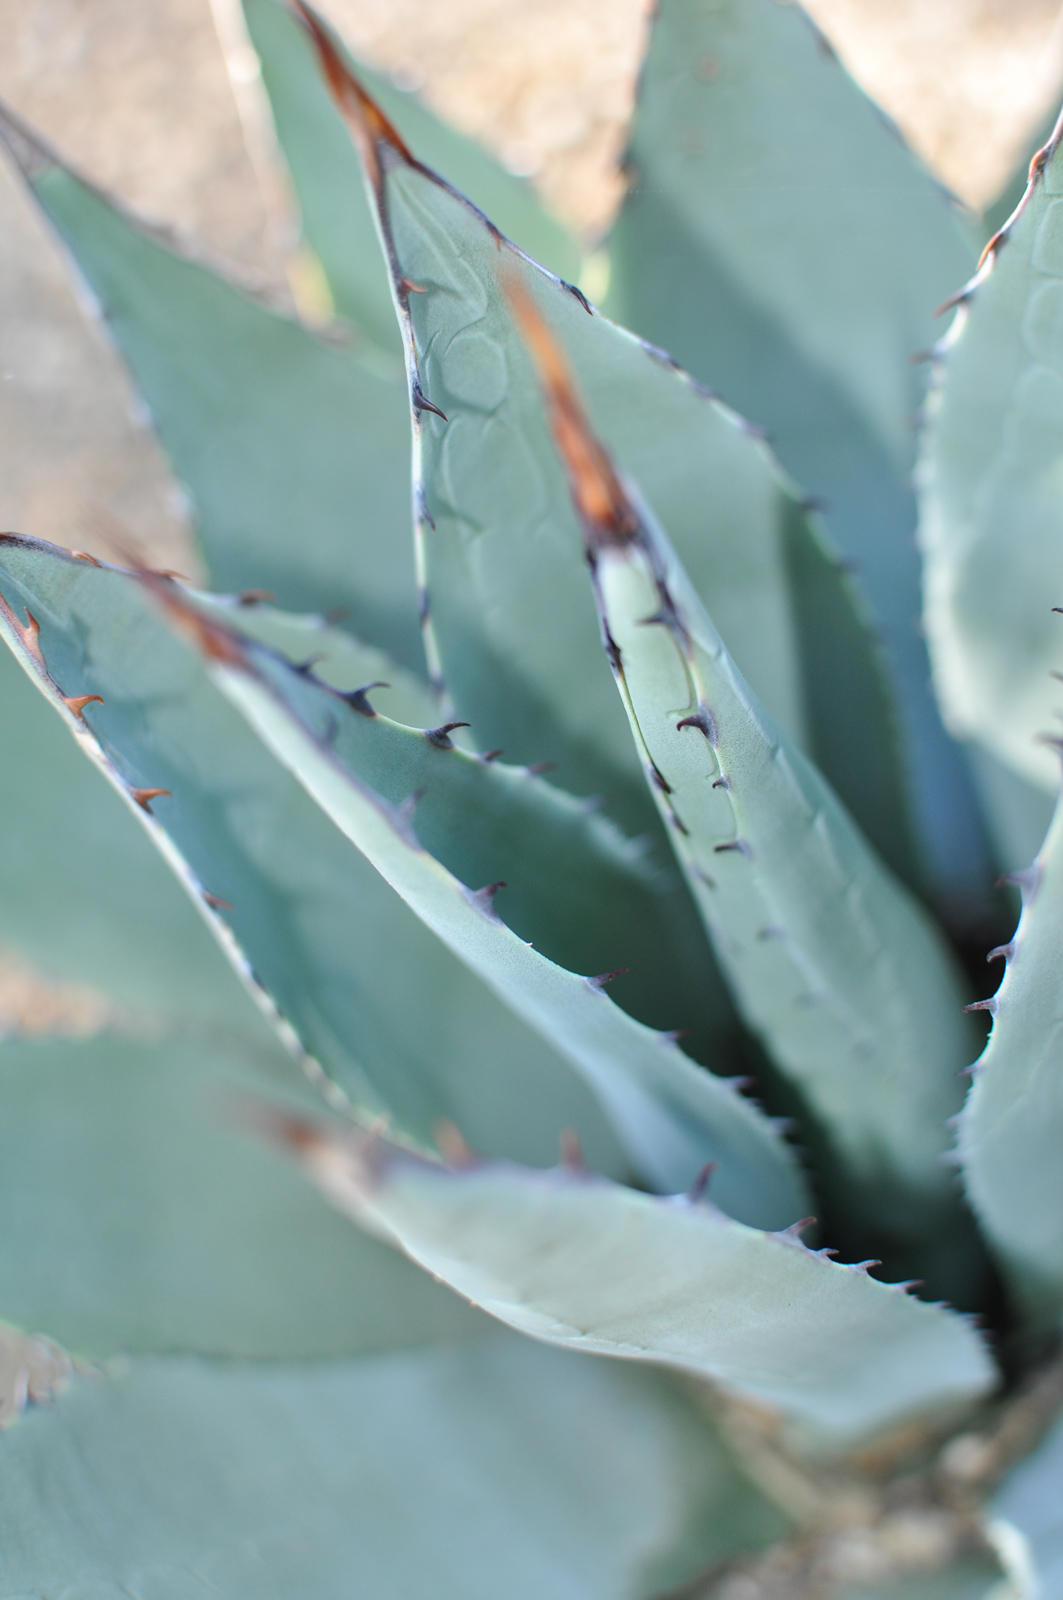 A close-up of the leaves and teeth of the Parry's Agave.